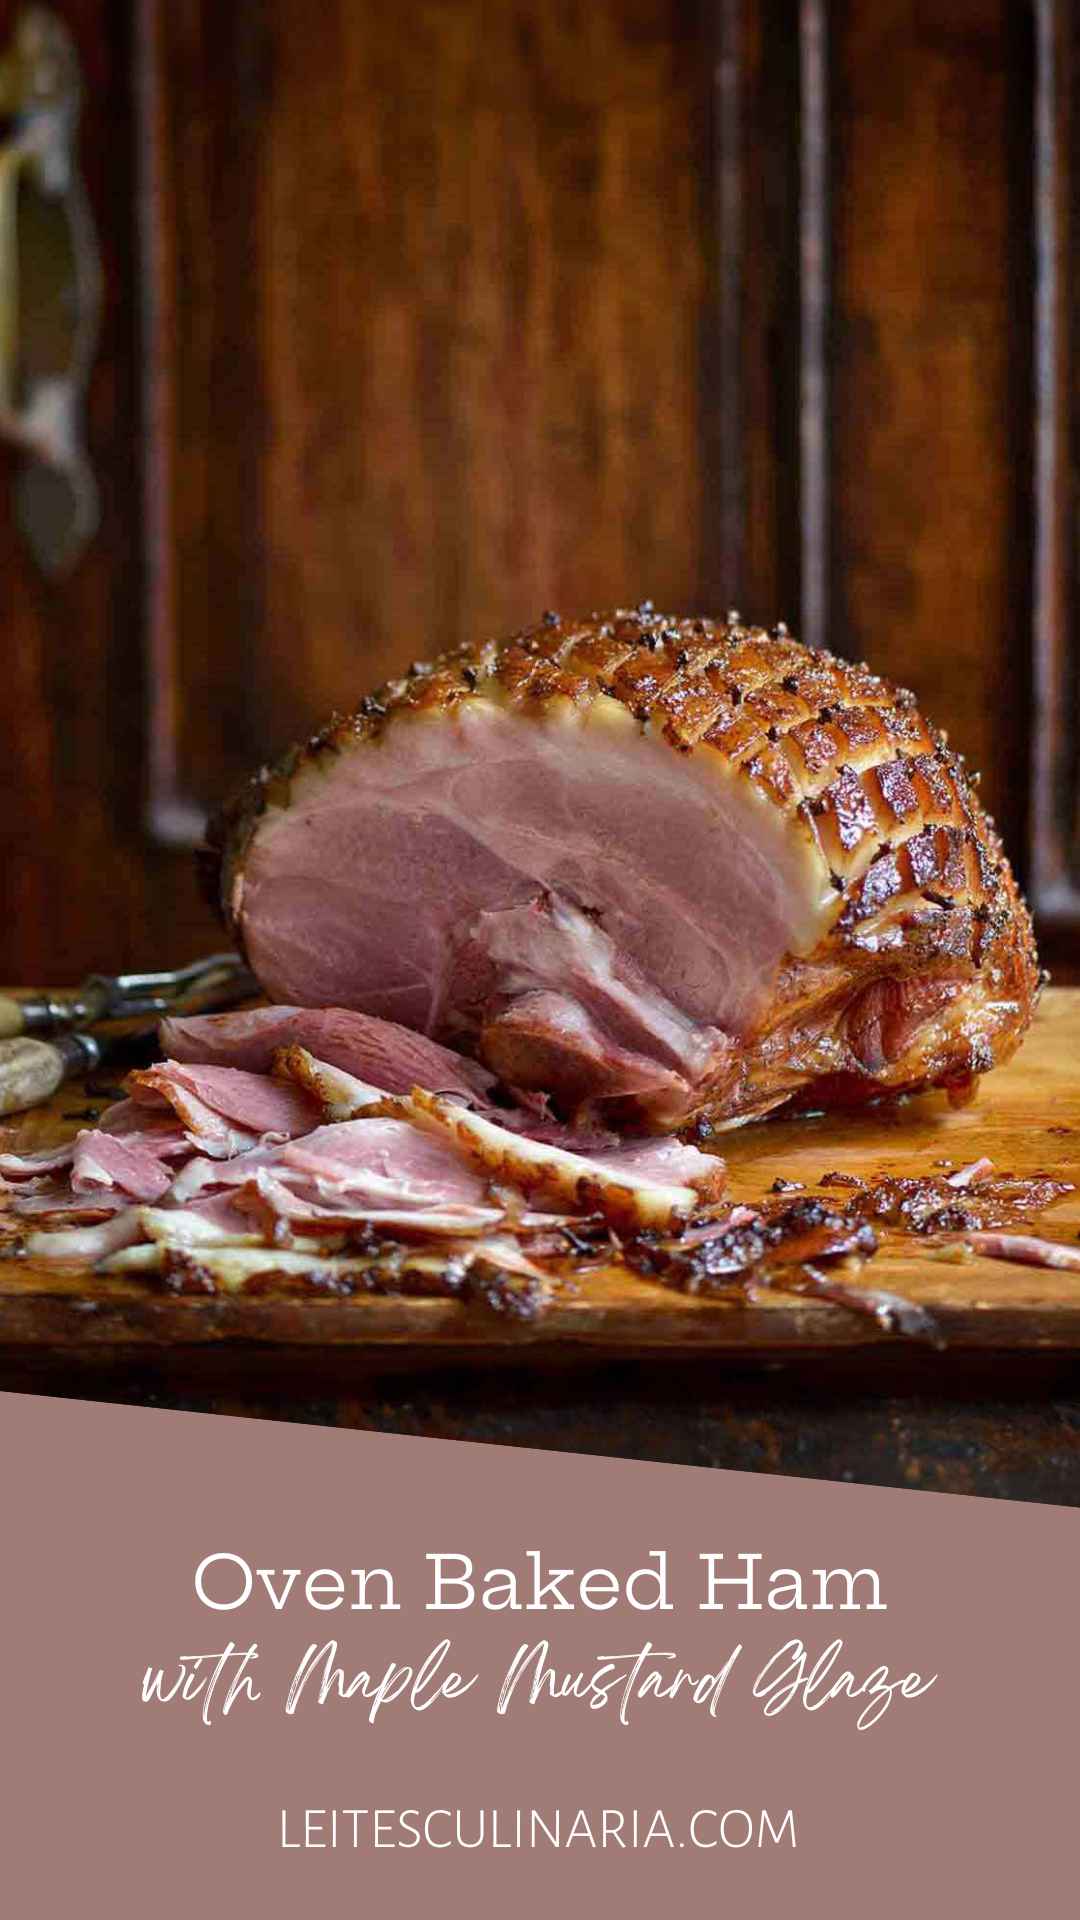 A partially carved mustard-glazed ham, cross-hatched and studded with cloves on a wooden cutting board.